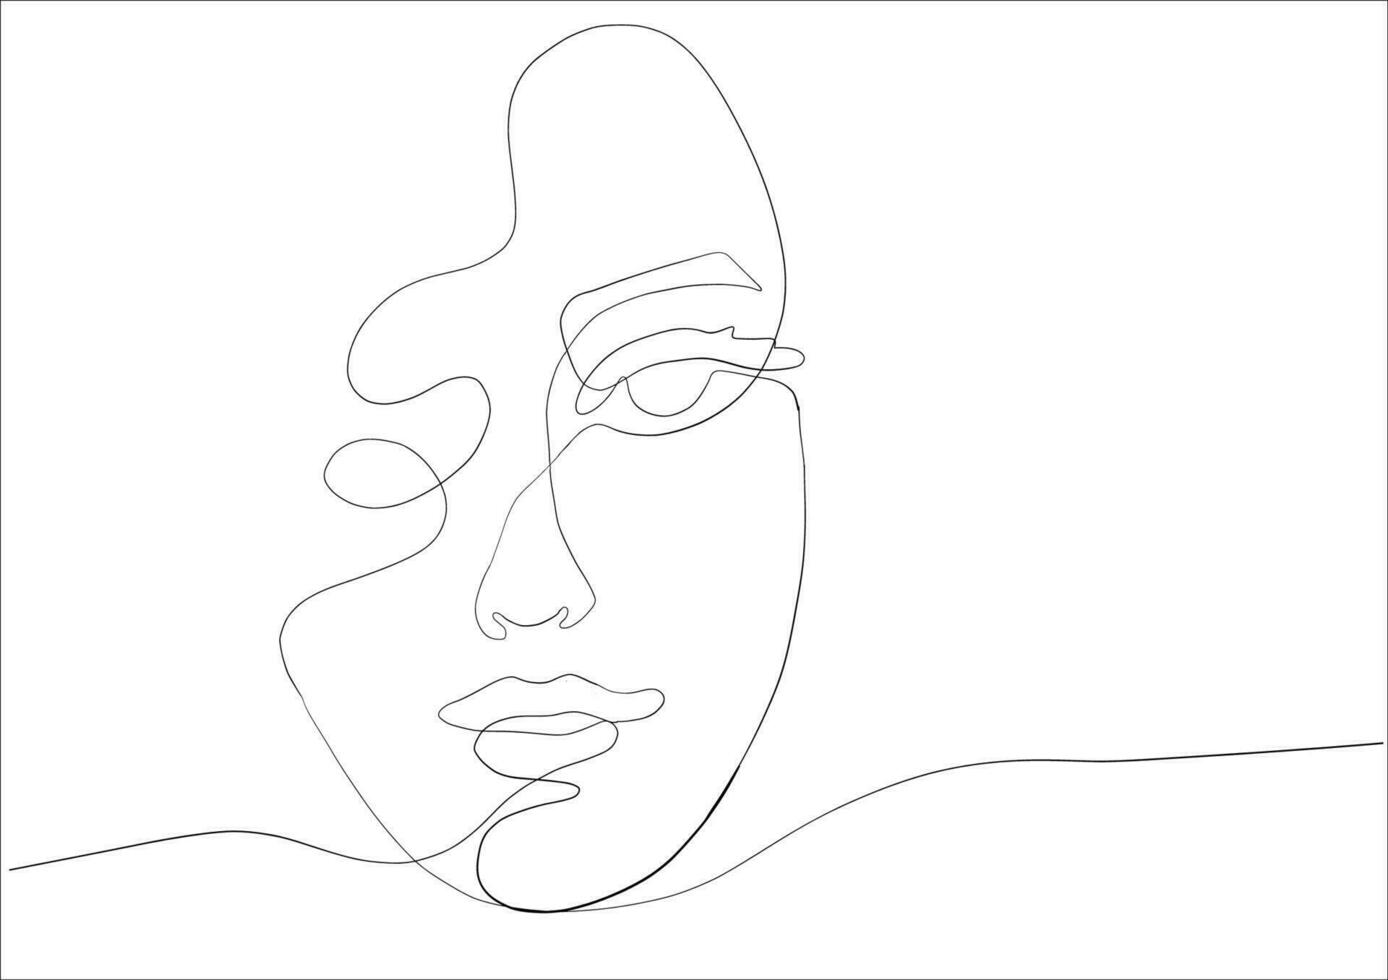 Continuous line drawing of face woman.Abstract line art portrait, Line,continuous line,drawing, Vector minimalism style and sketch portrait  concept.